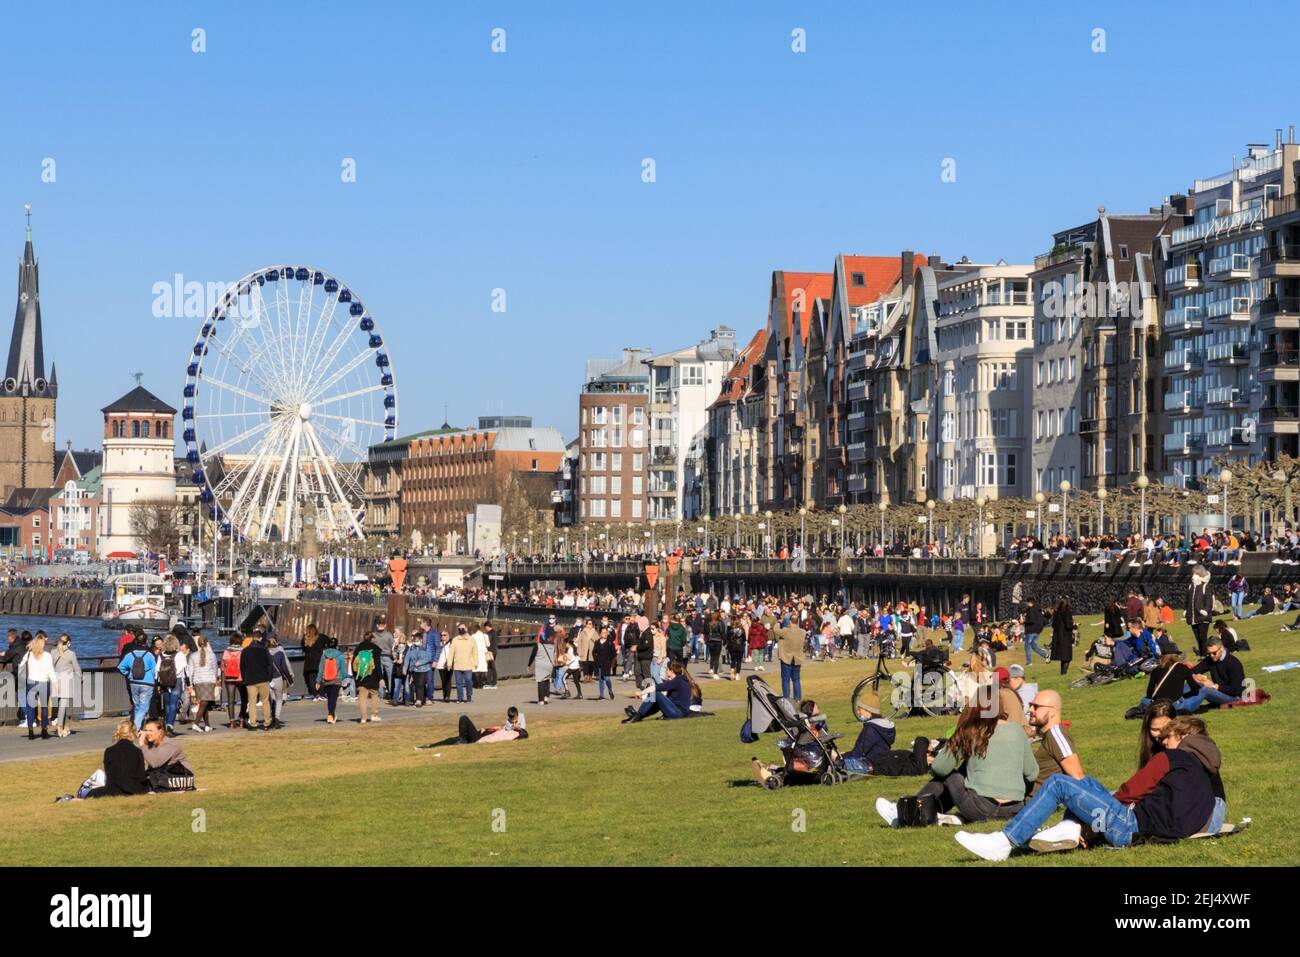 Düsseldorf, NRW, 2021. People enjoy their Sunday afternoon in beautiful warm sunshine with temperatures up to 18 degrees, strolling along the River Rhine and relaxing on the lawn in Düsseldorf, the capital of Germany's most populous state of North Rhine-Westphalia. Credit: Imageplotter/Alamy Live News Stock Photo